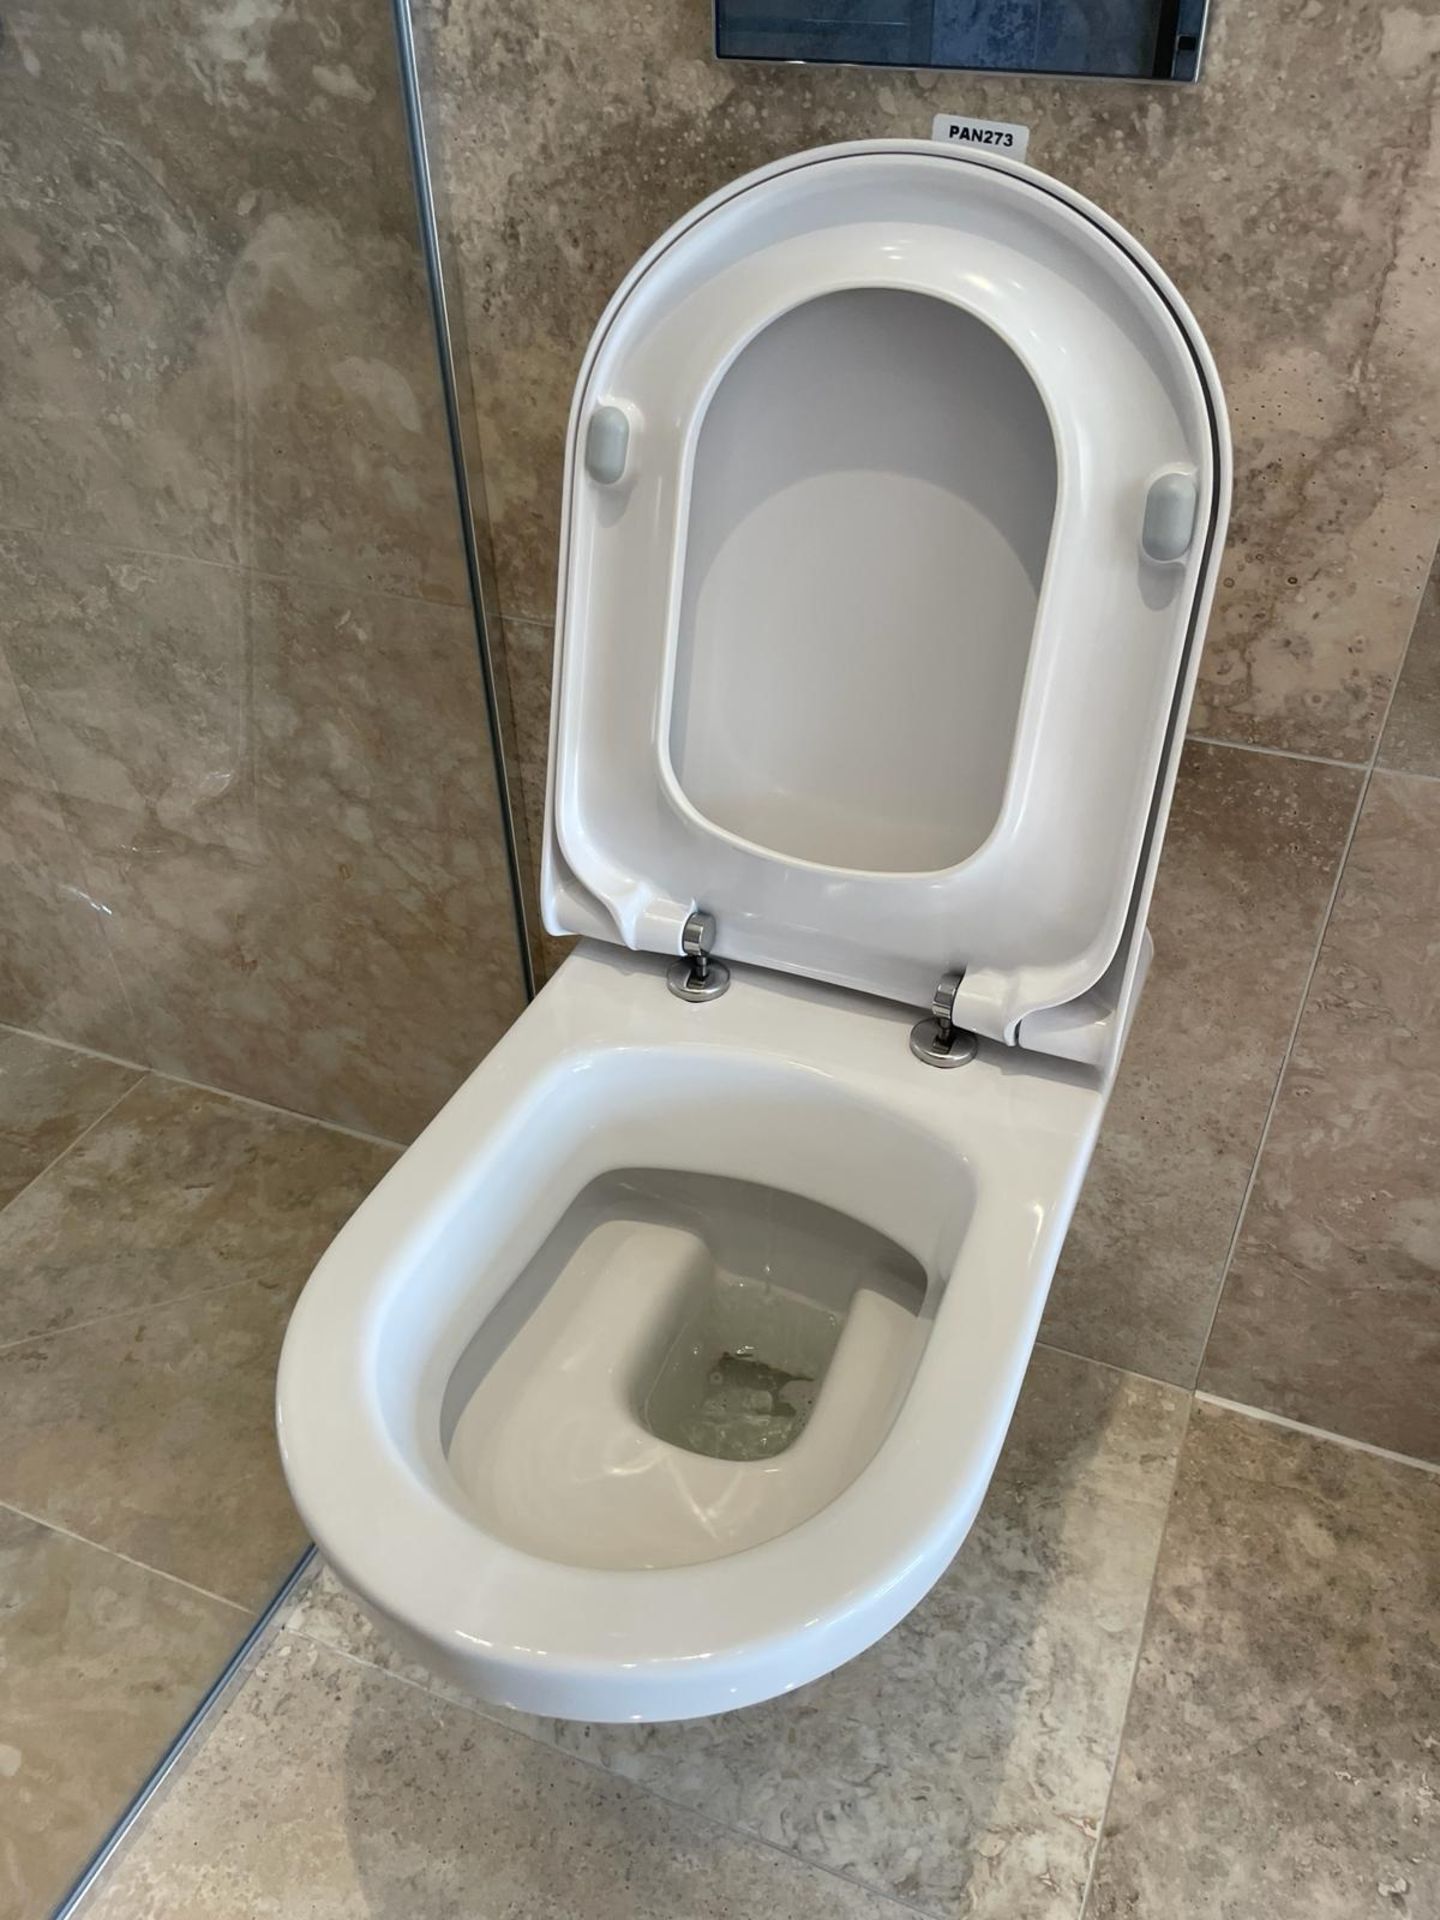 1 x VILLEROY & BOCH Wall Hung Toilet with Geberit Flush Plate - Ref: PAN273 BED3bth - CL896 - NO VAT - Image 6 of 9